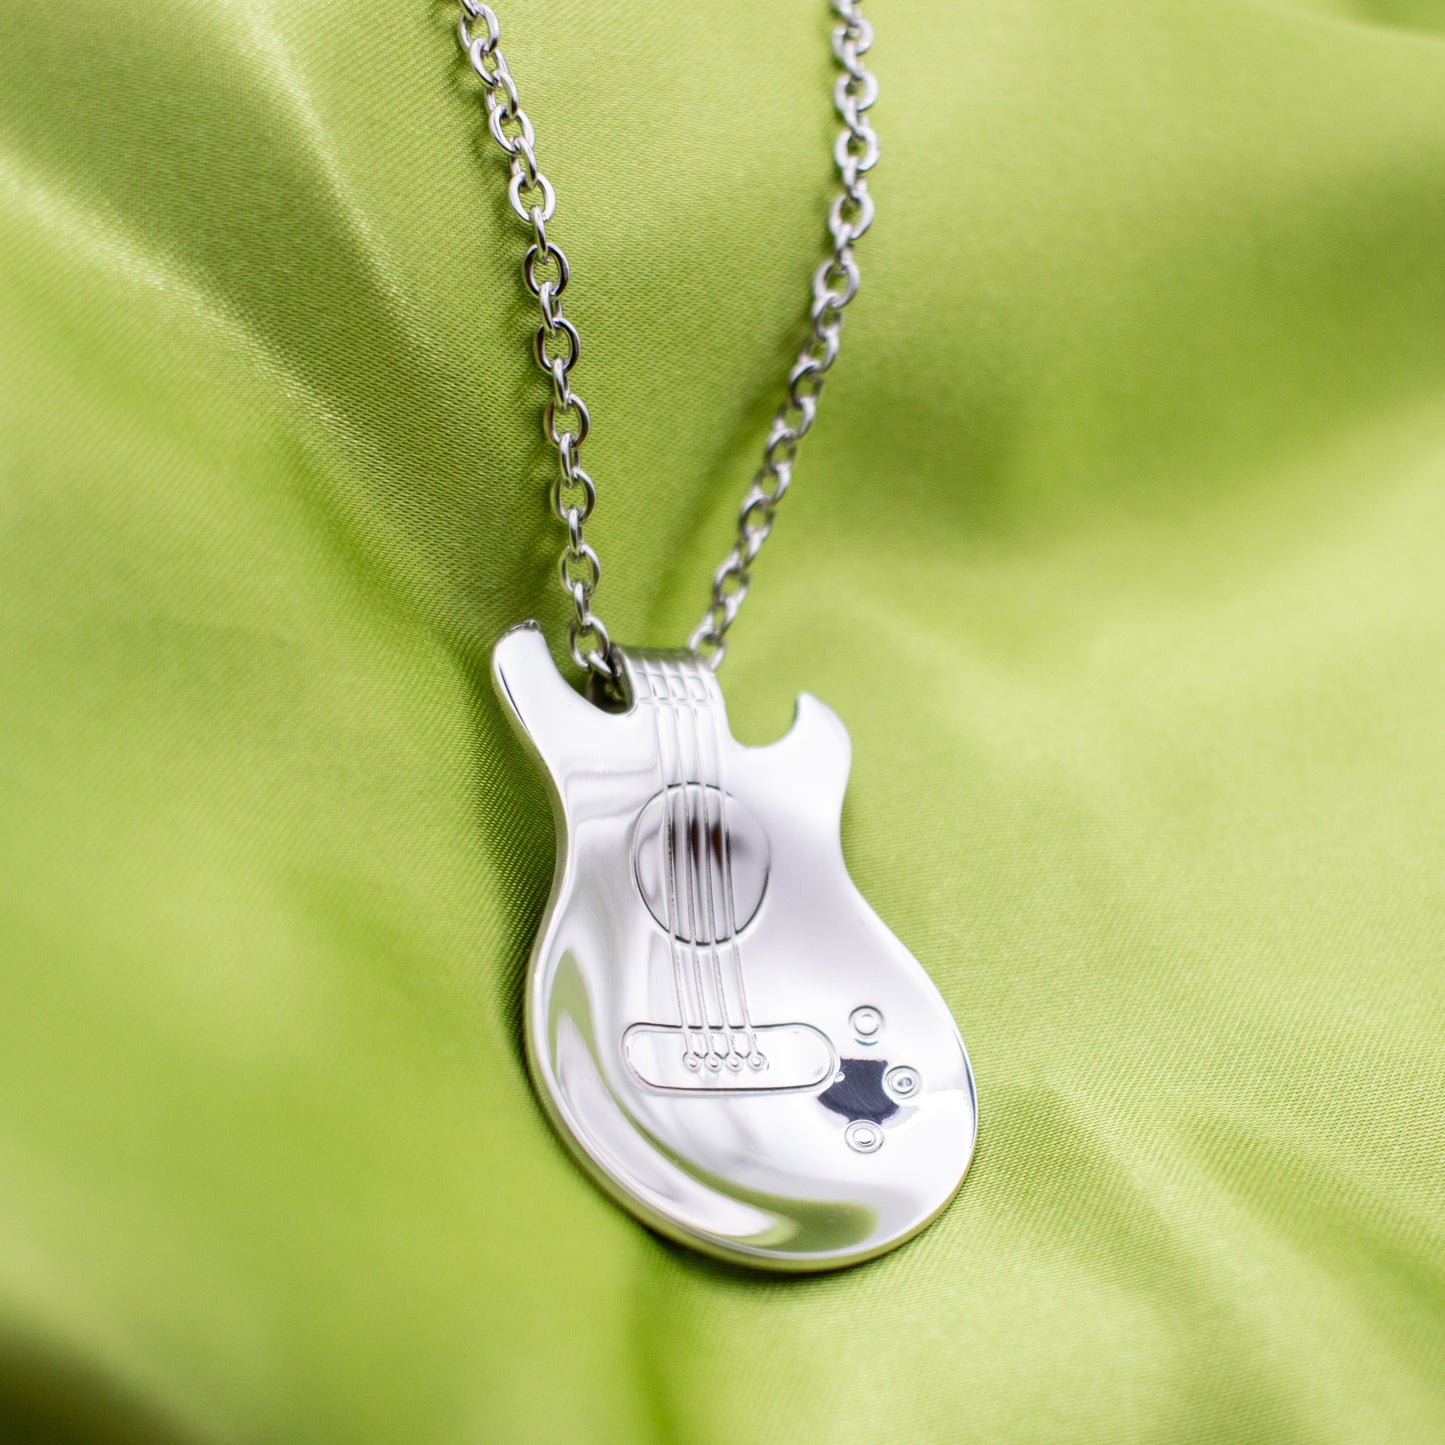 Bass Guitar Spoon Necklace